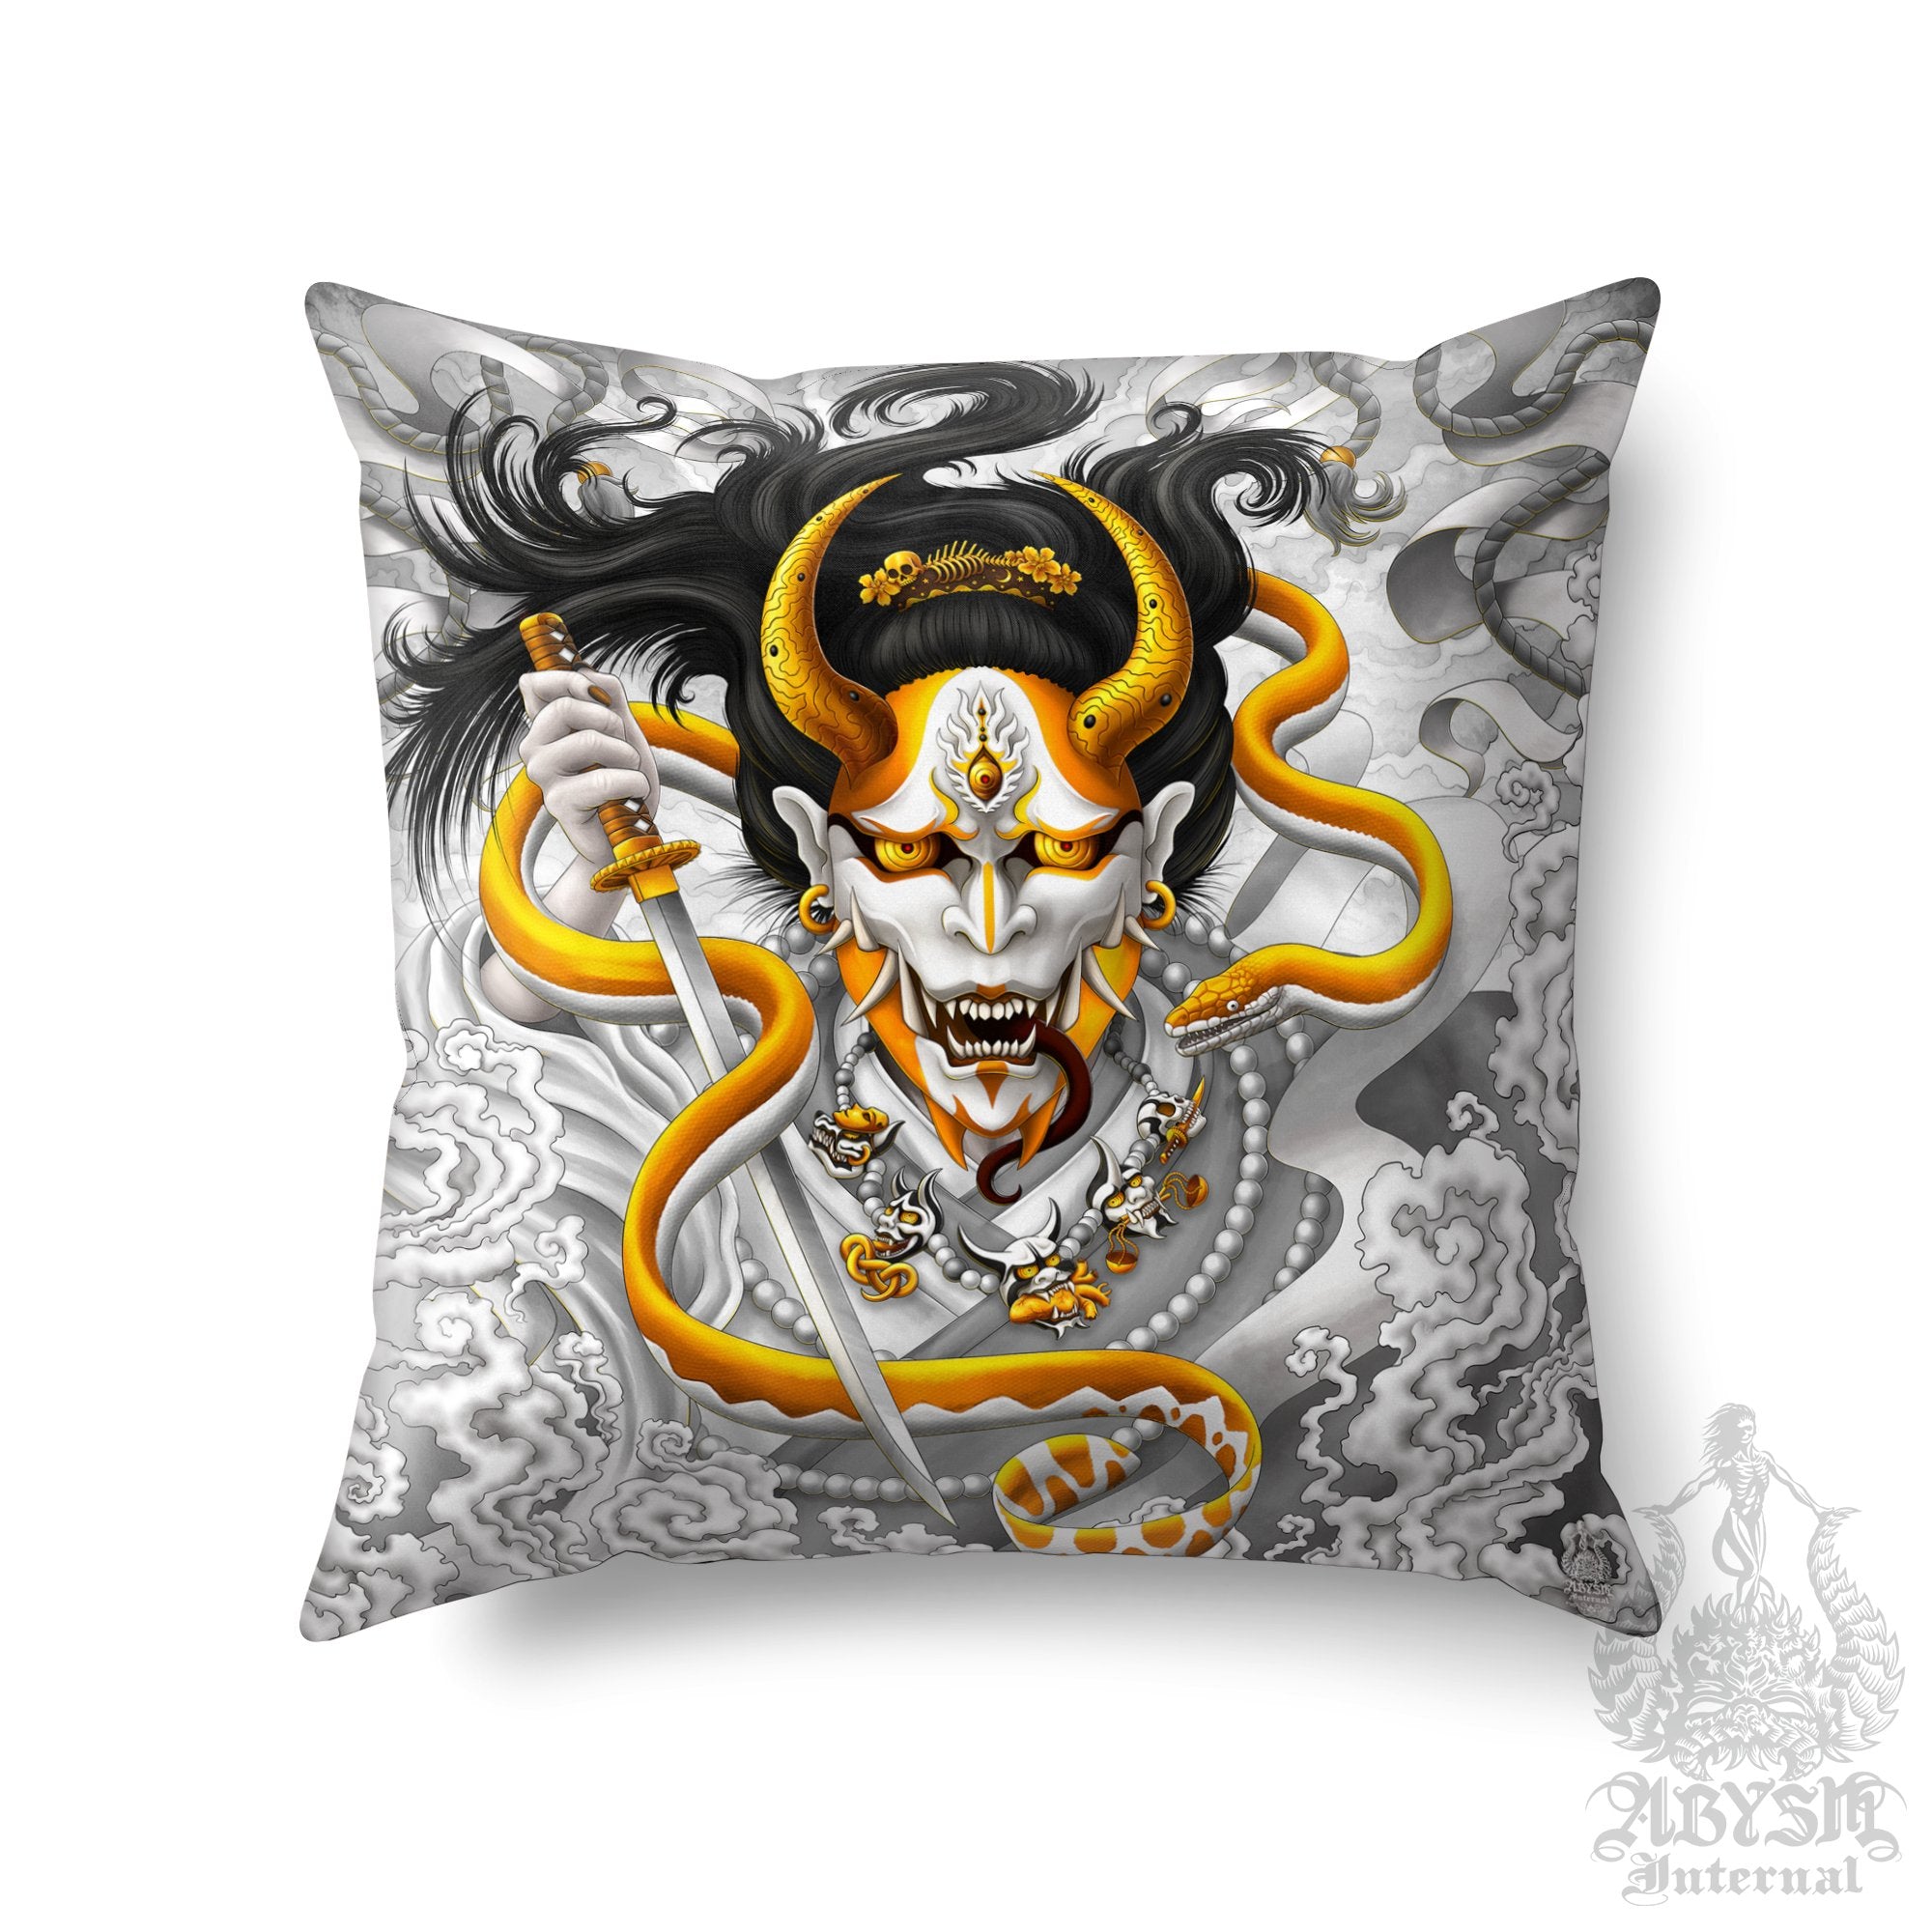 Hannya Throw Pillow, Decorative Accent Pillow, Square Cushion Cover, Japanese Demon & Snake, Anime Room Decor - White Gold - Abysm Internal